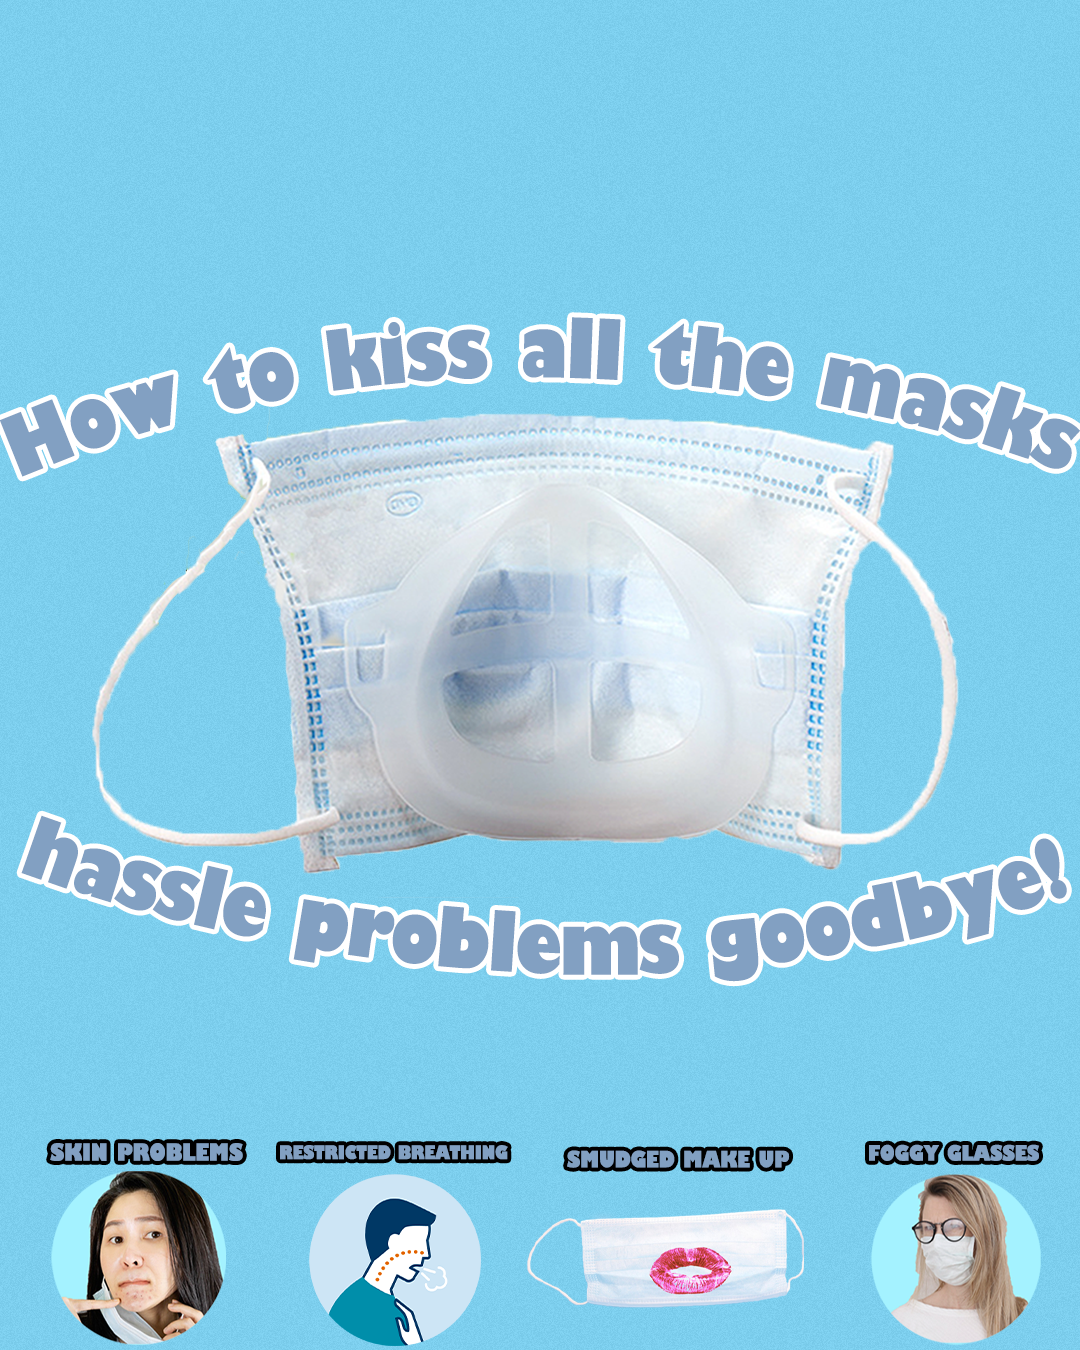 How to kiss all the masks hassle problems goobye!